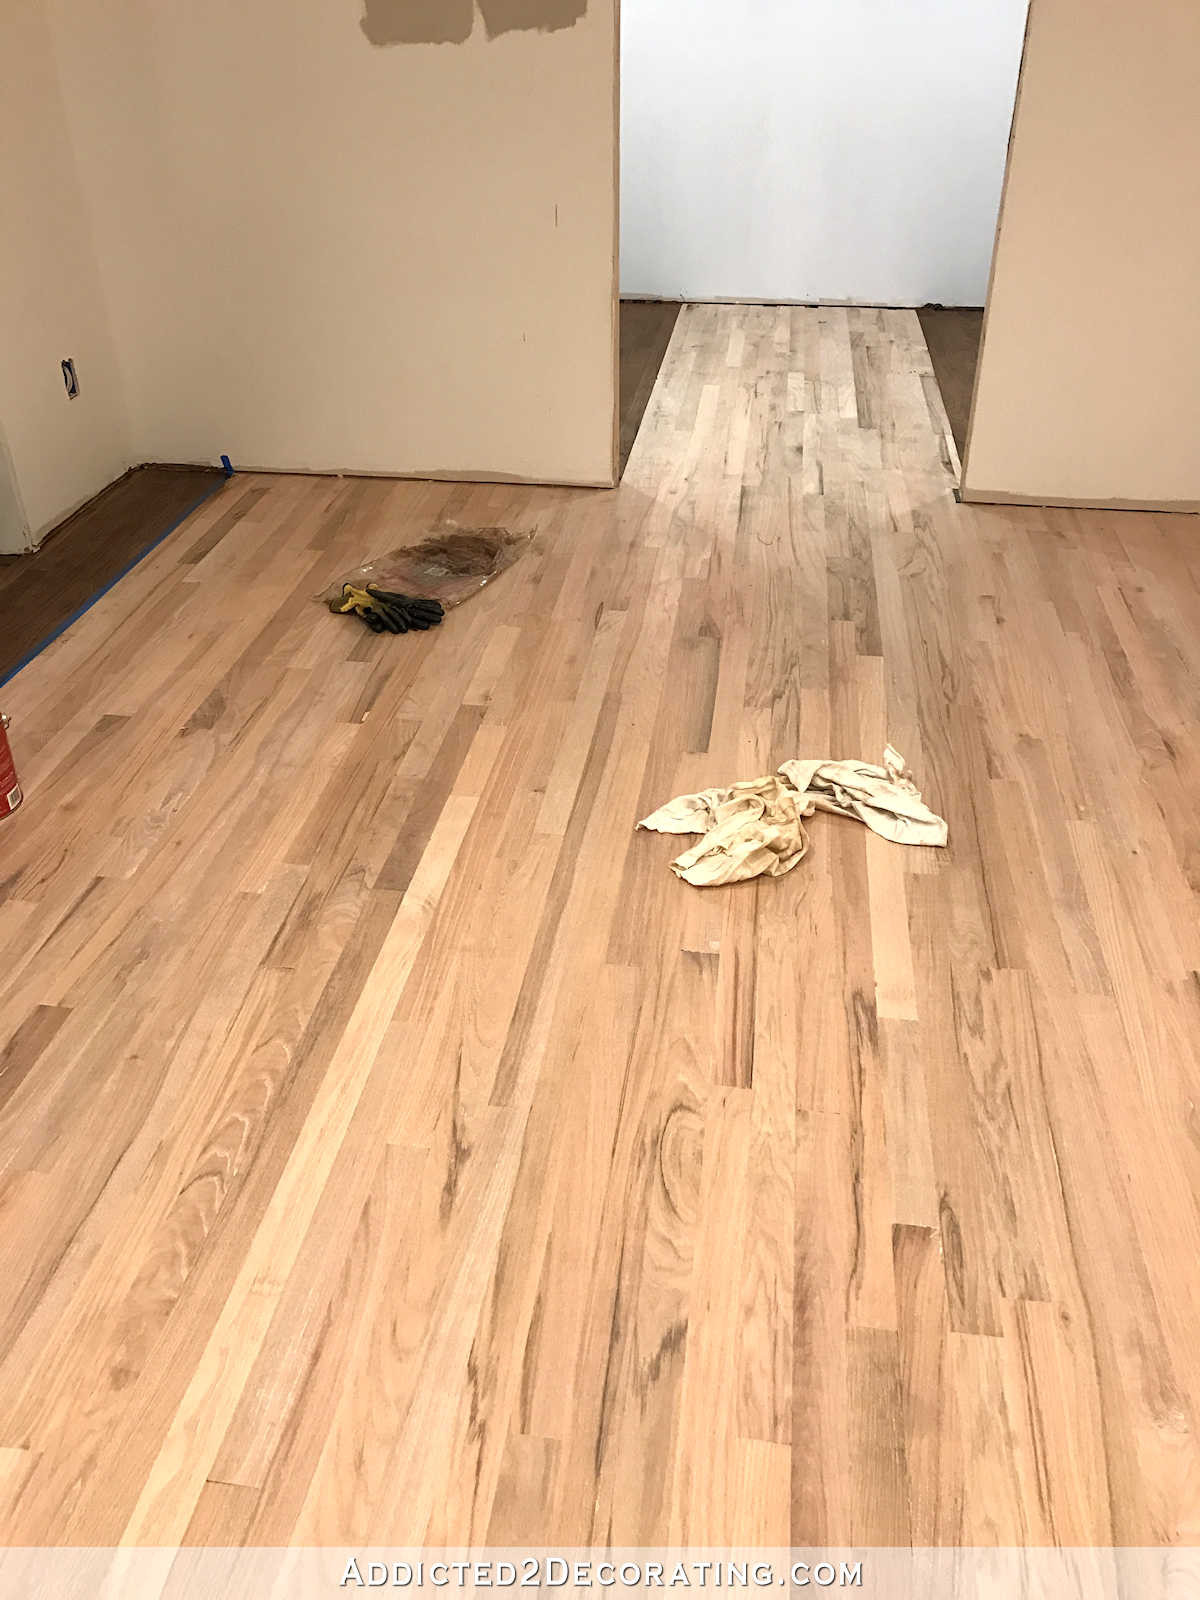 Hardwood Floor Stain Colors for Red Oak Of Adventures In Staining My Red Oak Hardwood Floors Products Process with Regard to Staining Red Oak Hardwood Floors 12 Breakfast Room and Center Of Pantry Left to